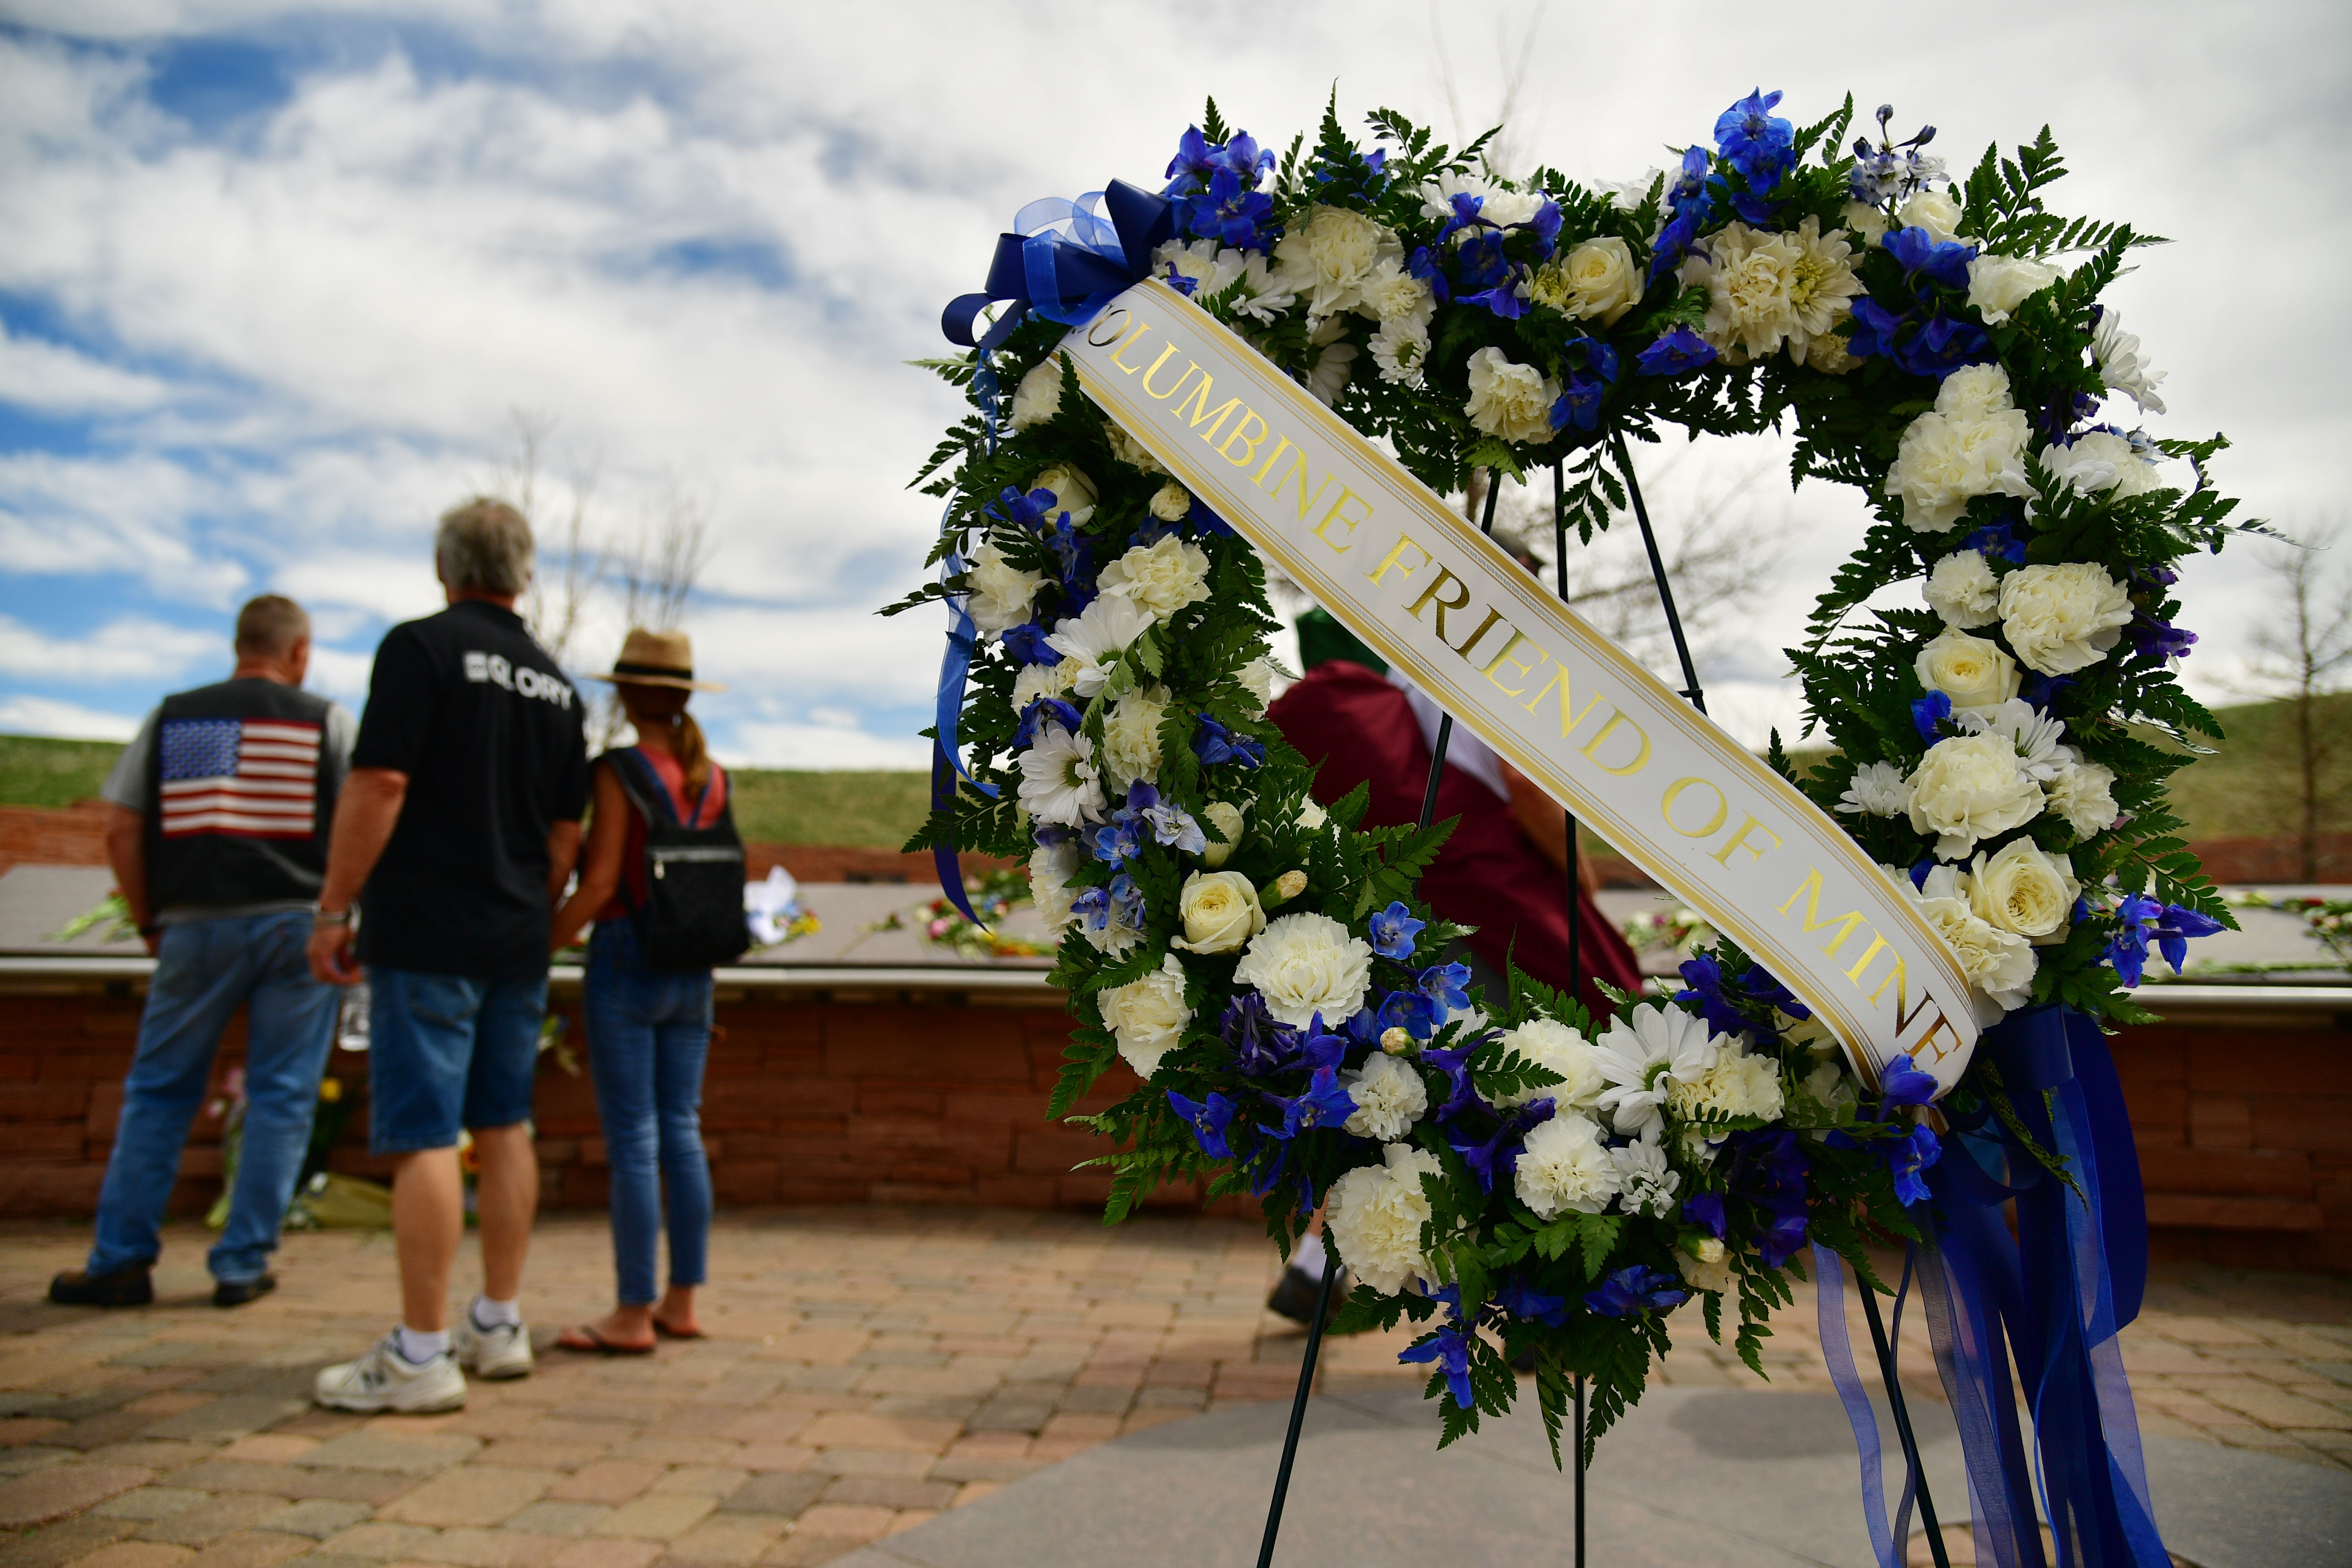 Flowers are placed at the "Columbine: 20 years" event  in honor of those impacted by the massacre.